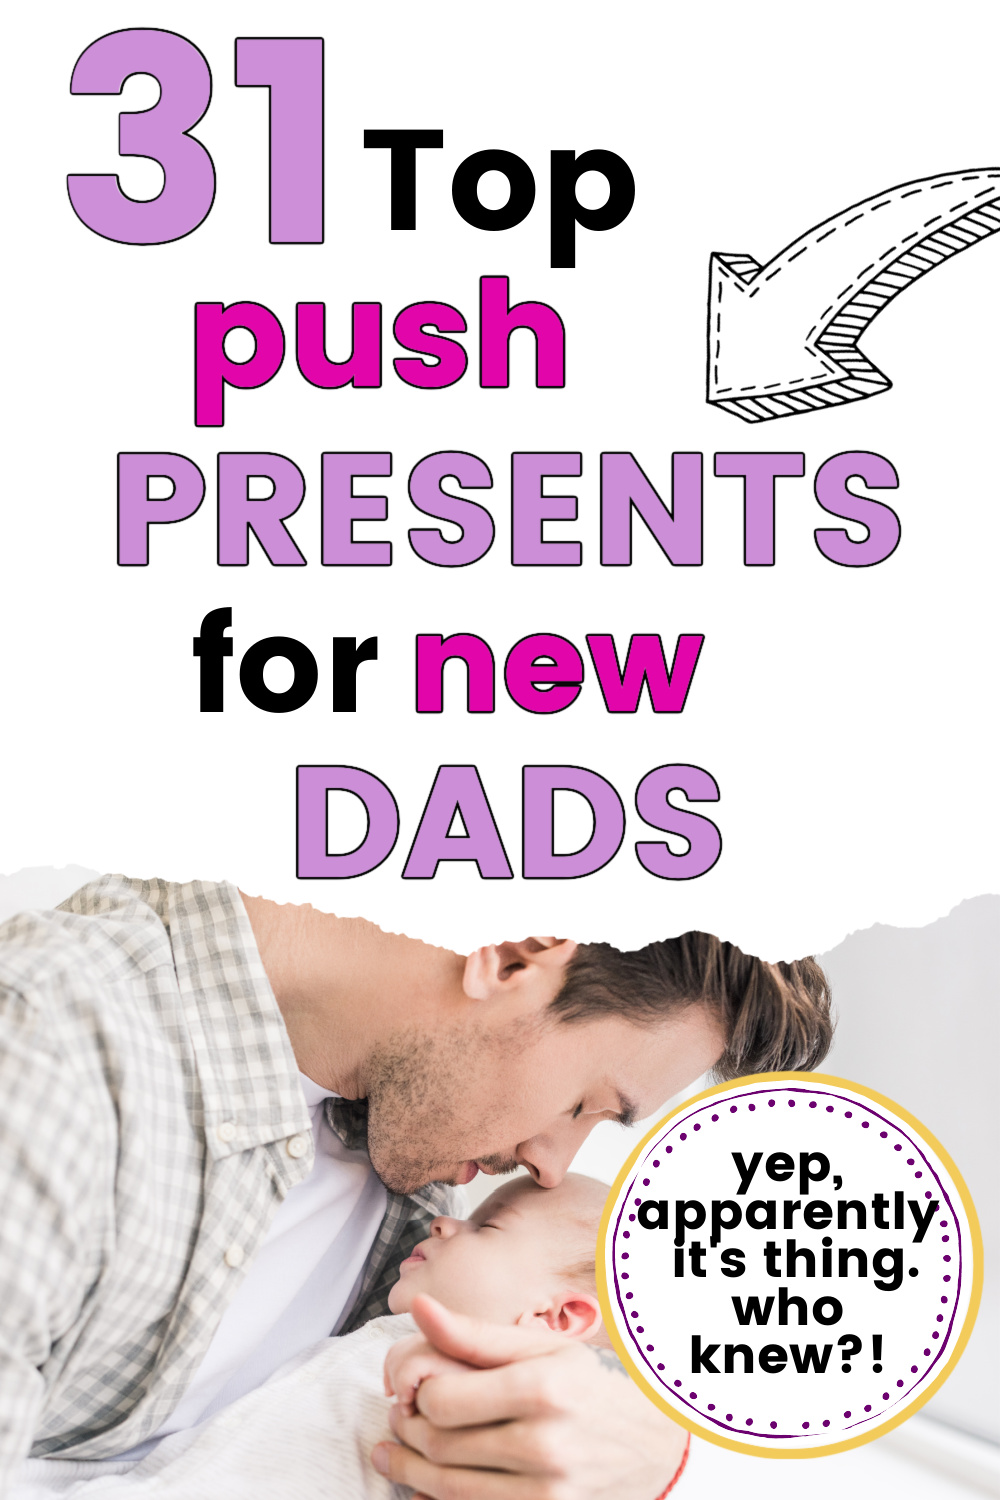 dad holding baby and kissing baby's forehead, with text overlay, "31 top push presents for new dads".